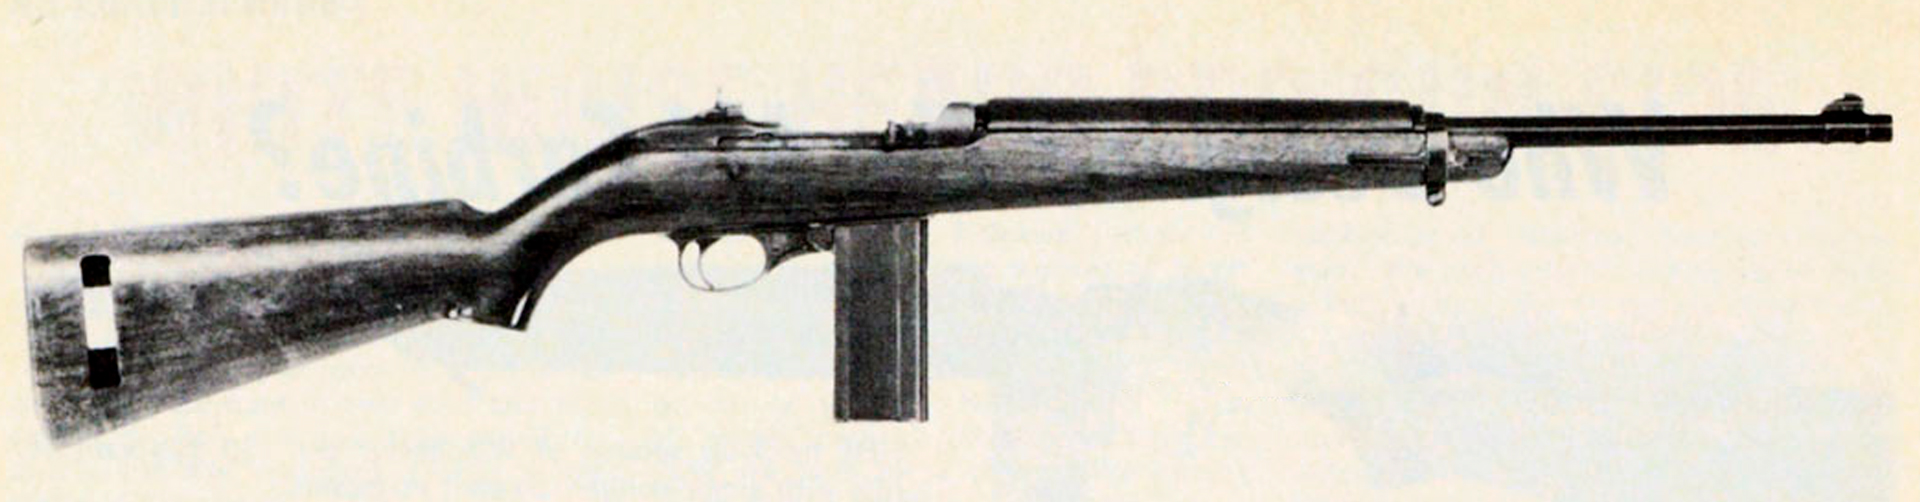 M1 Carbine final prototype right-side view